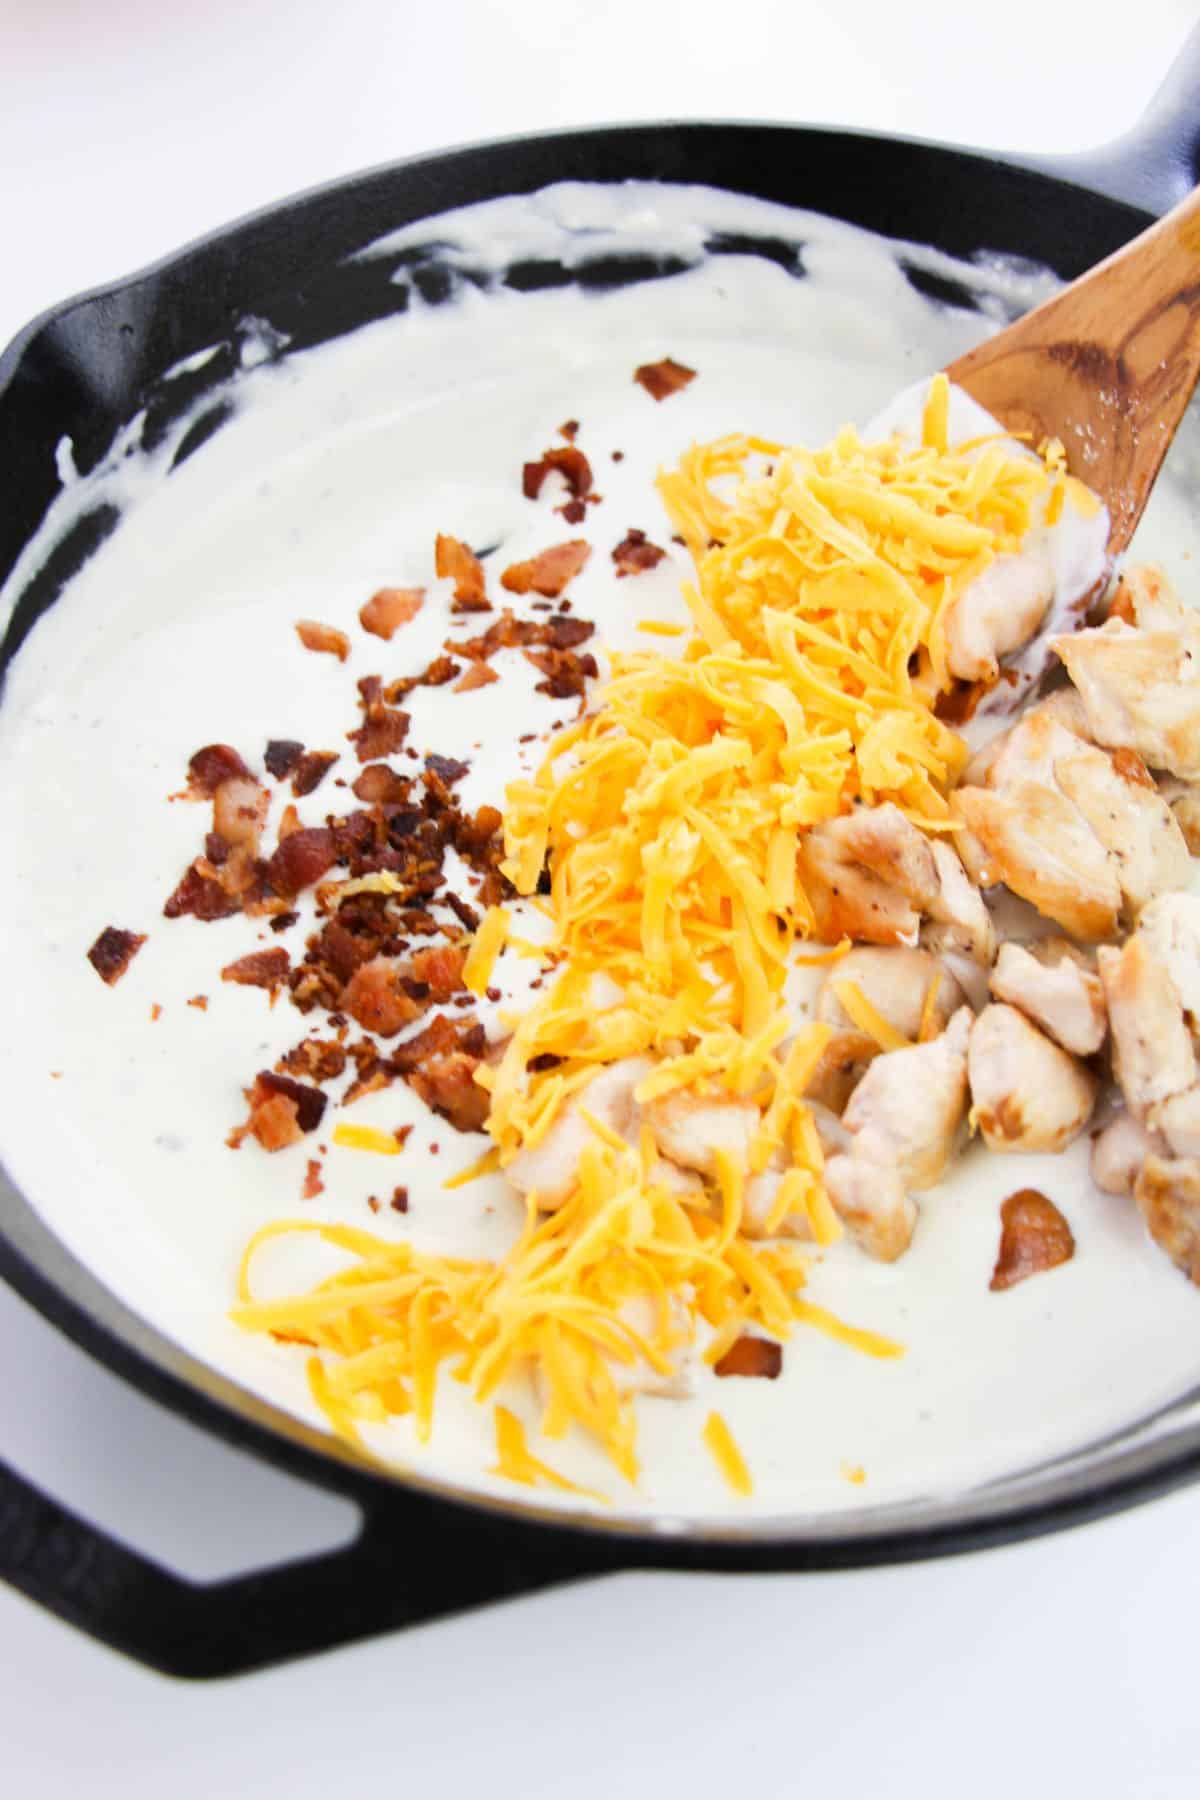 The cheese, bacon, and chicken are added to the sauce mixture.